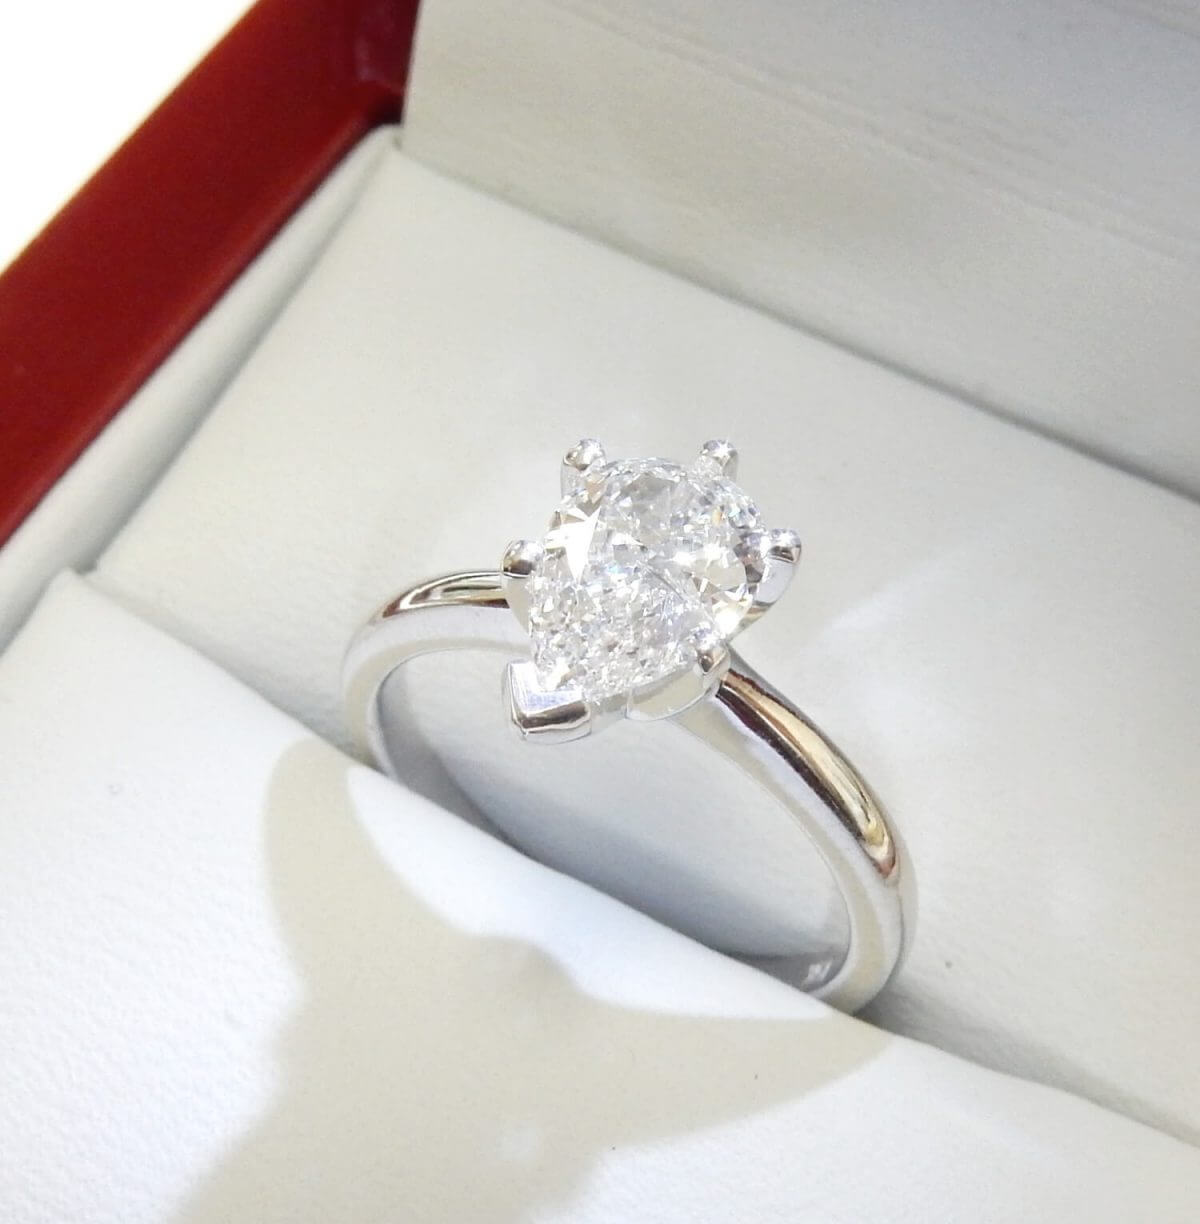 Pear shape diamond solitaire engagement ring